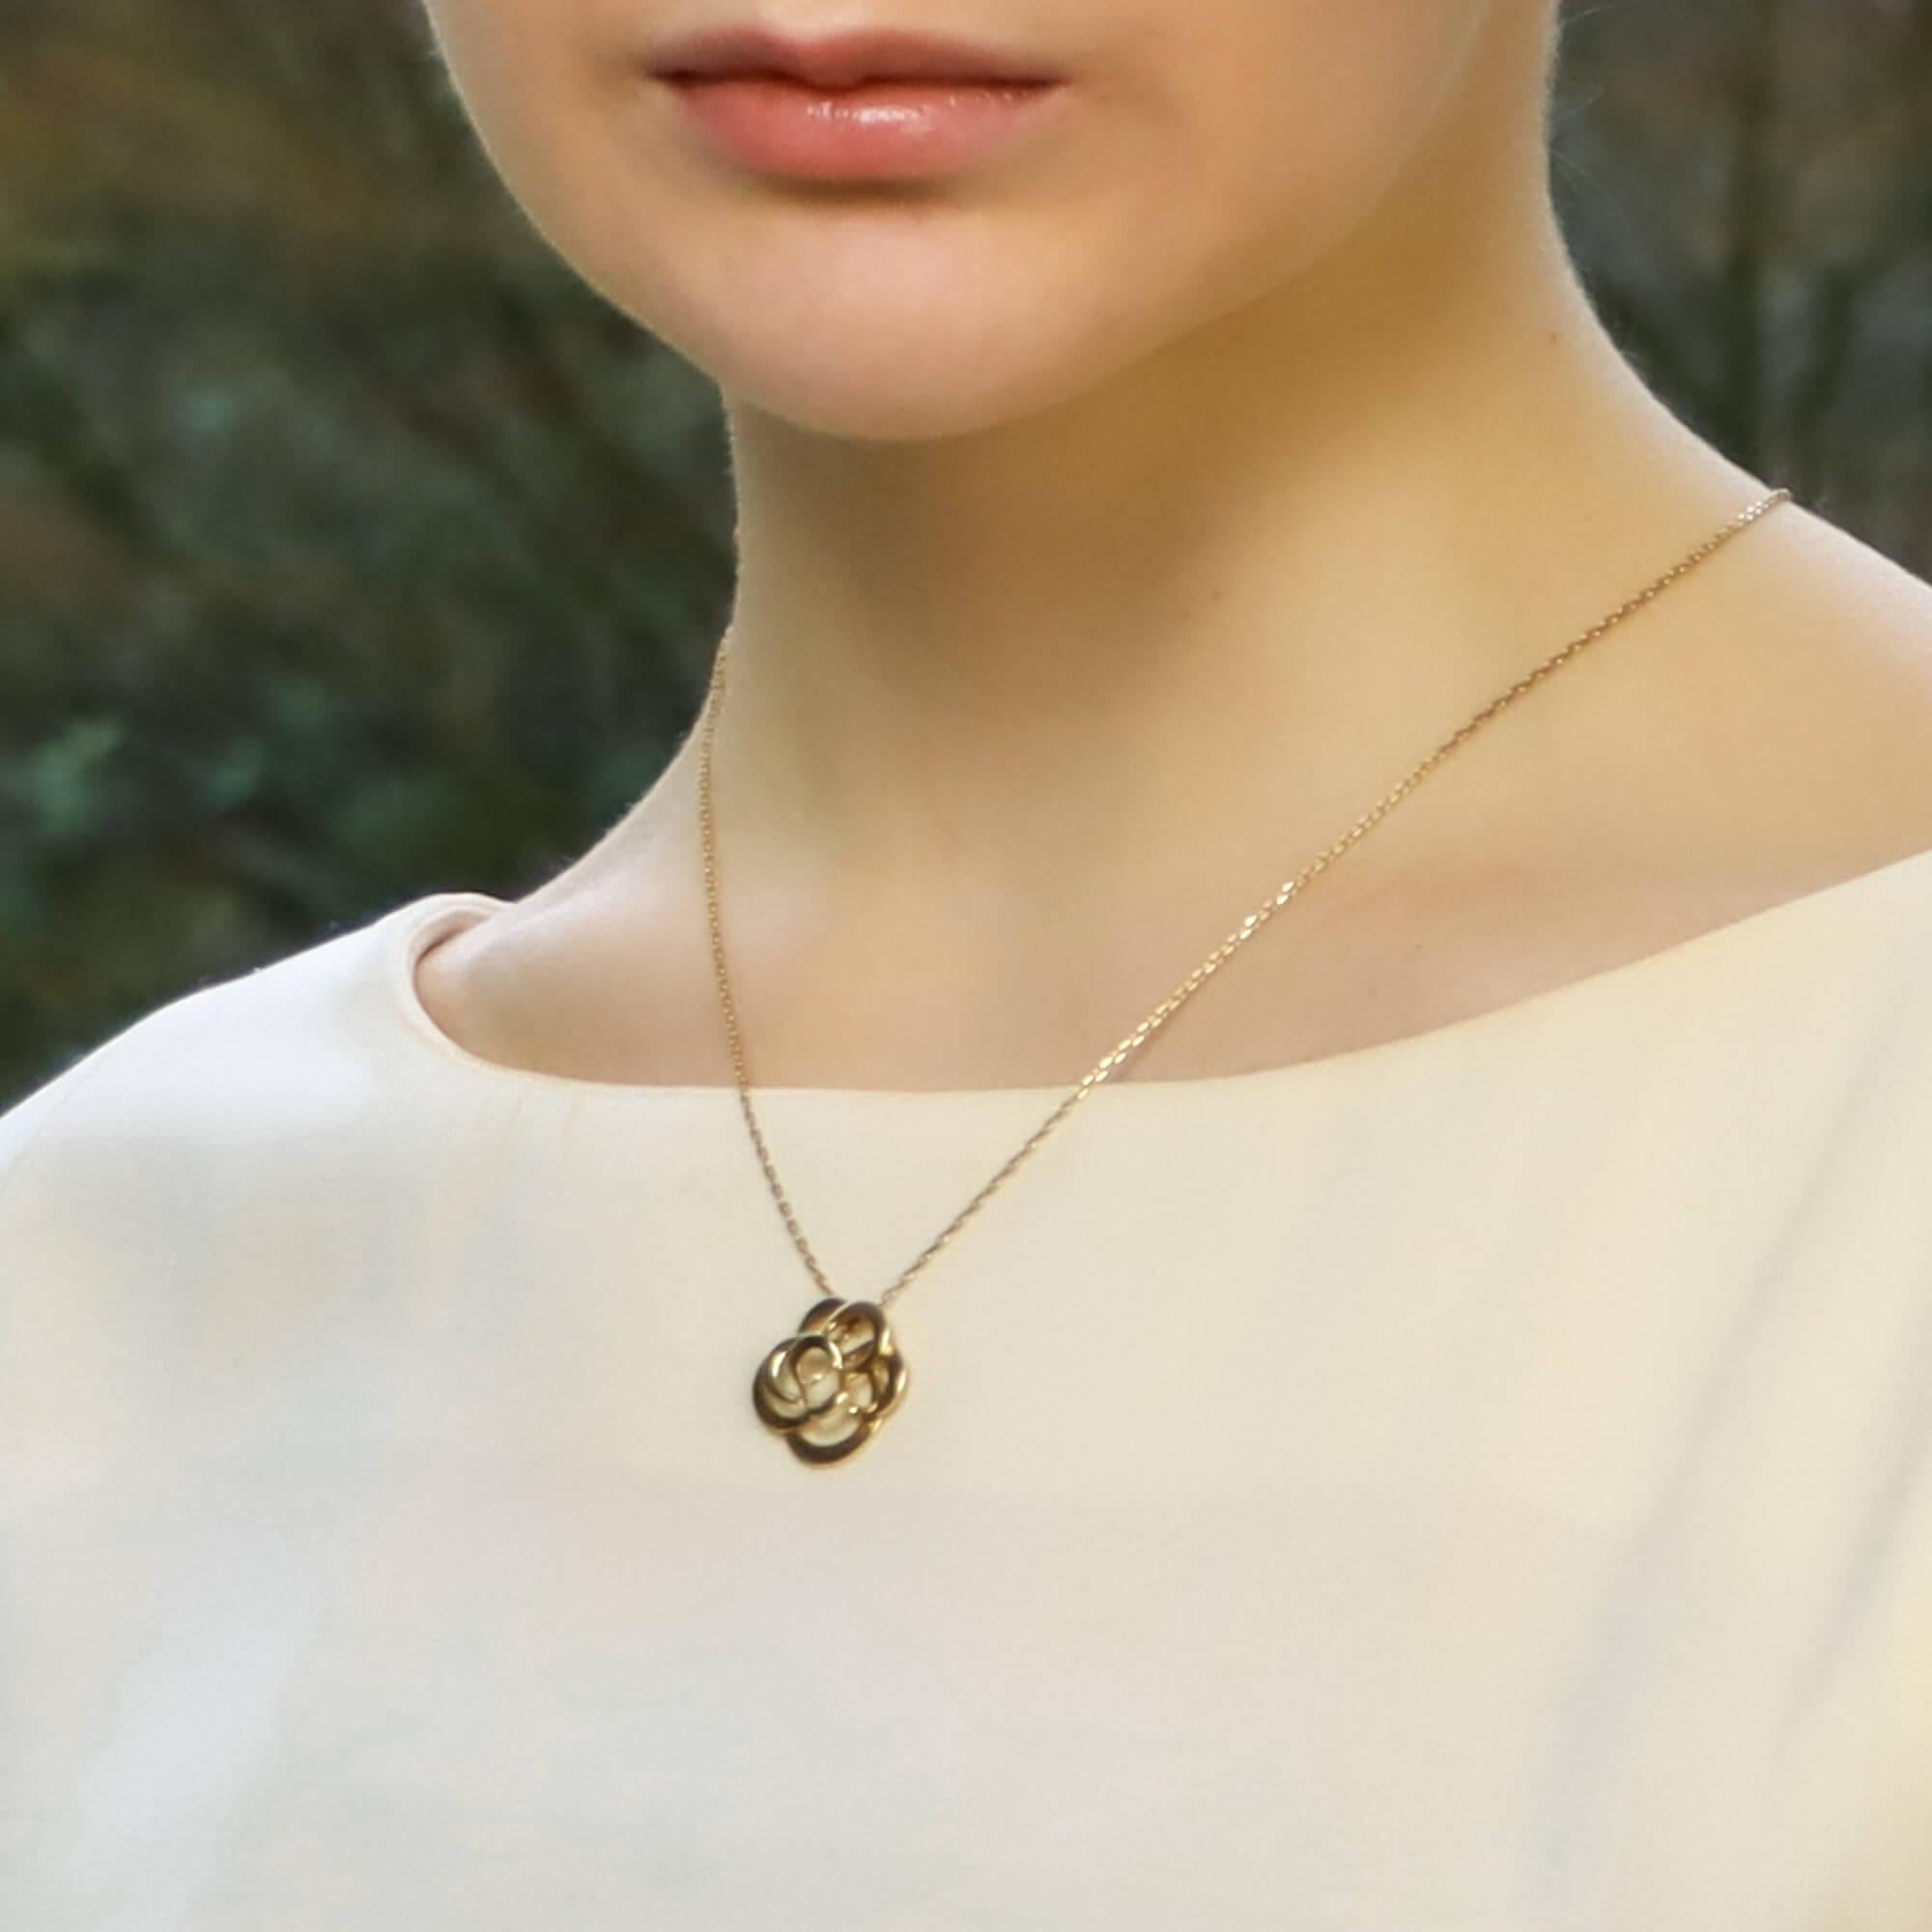 A beautiful CHANEL Fil De Camélia Flower Pendant Necklace set is 18k yellow gold.

The pendant depicts the signature CHANEL Camélia flower on a 22 inch yellow gold chain. The beauty of this piece lines in the design, the polished yellow gold makes